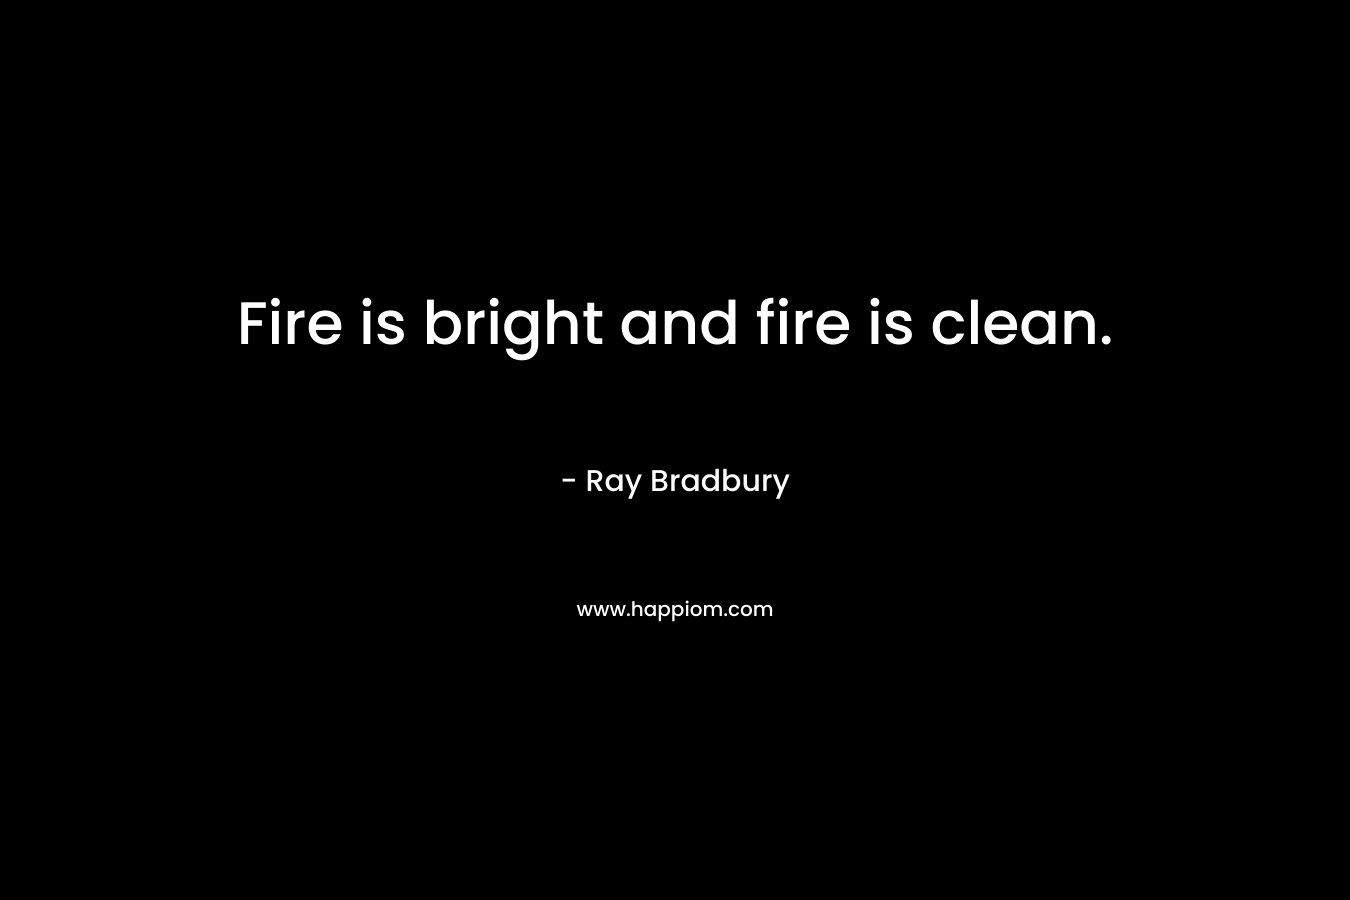 Fire is bright and fire is clean.